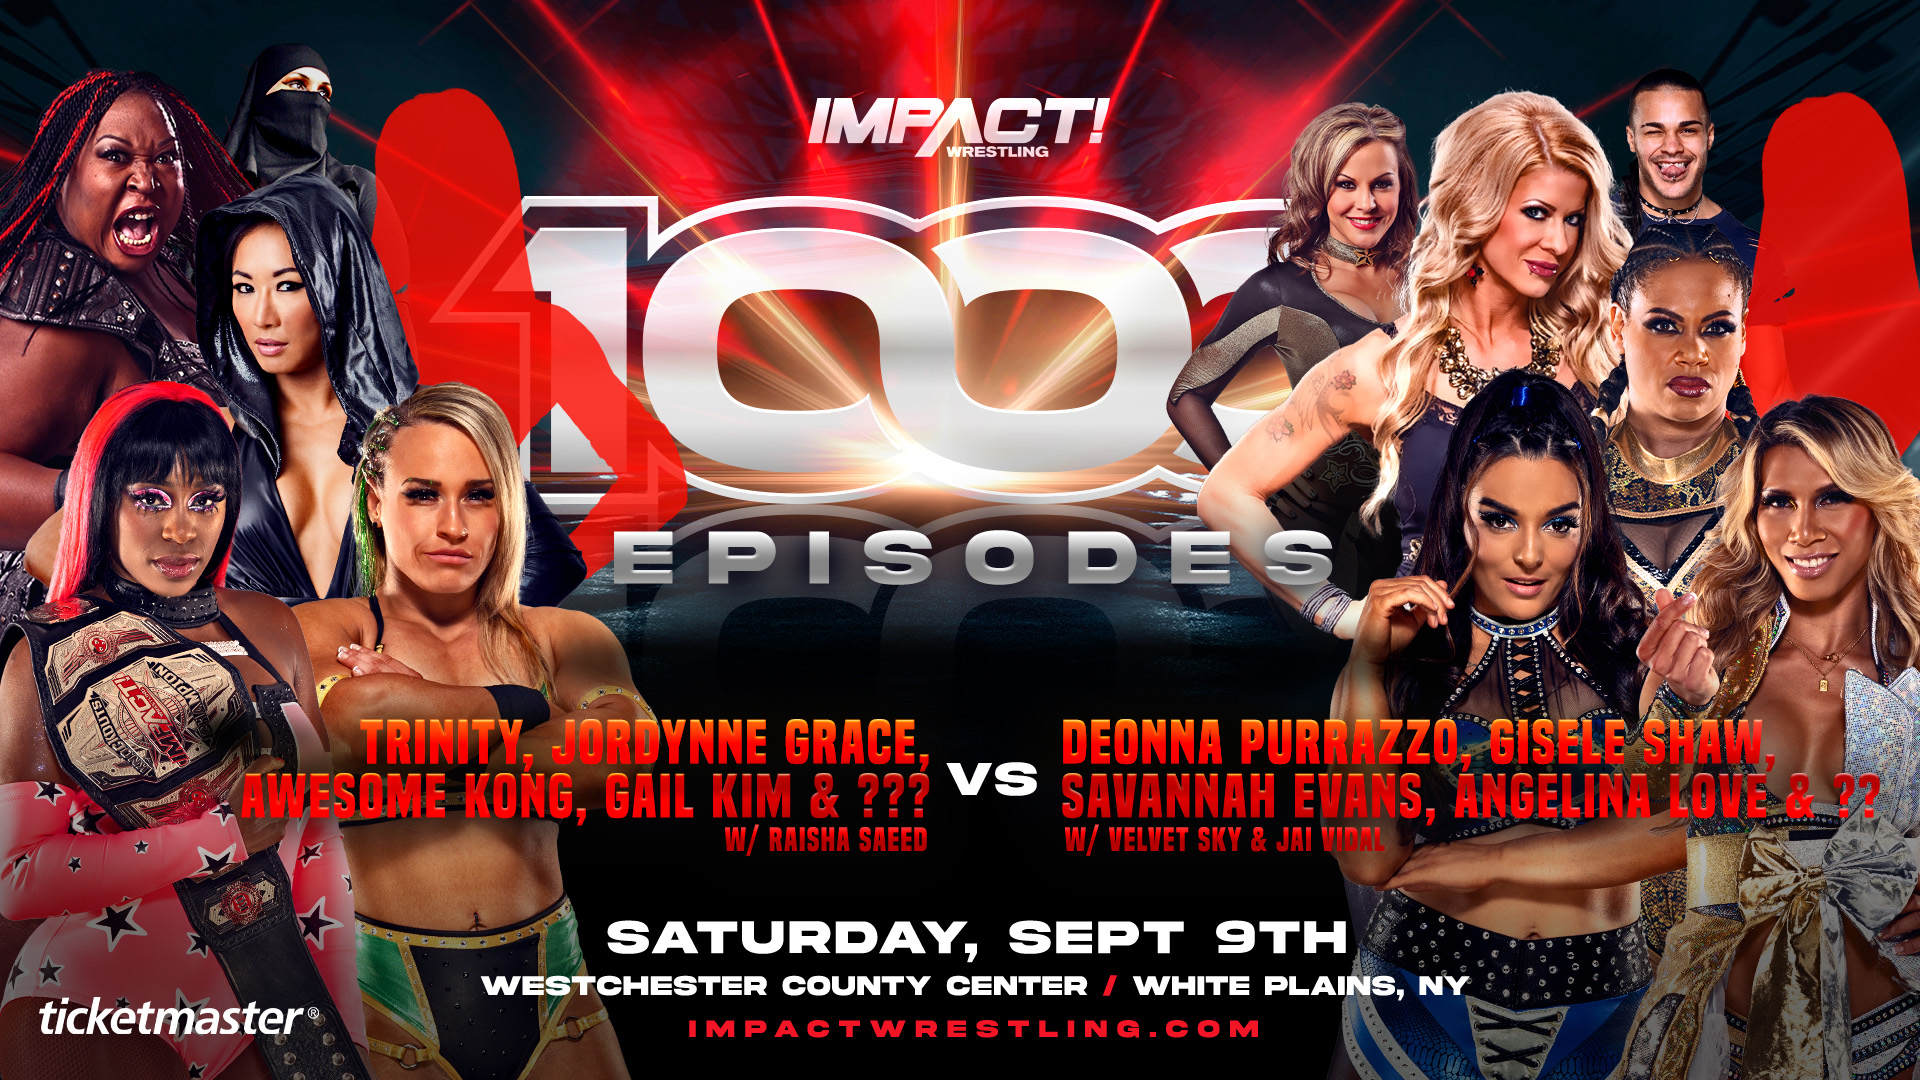 Trinity & Jordynne Grace To Team With Gail Kim & Awesome Kong At IMPACT 1,000